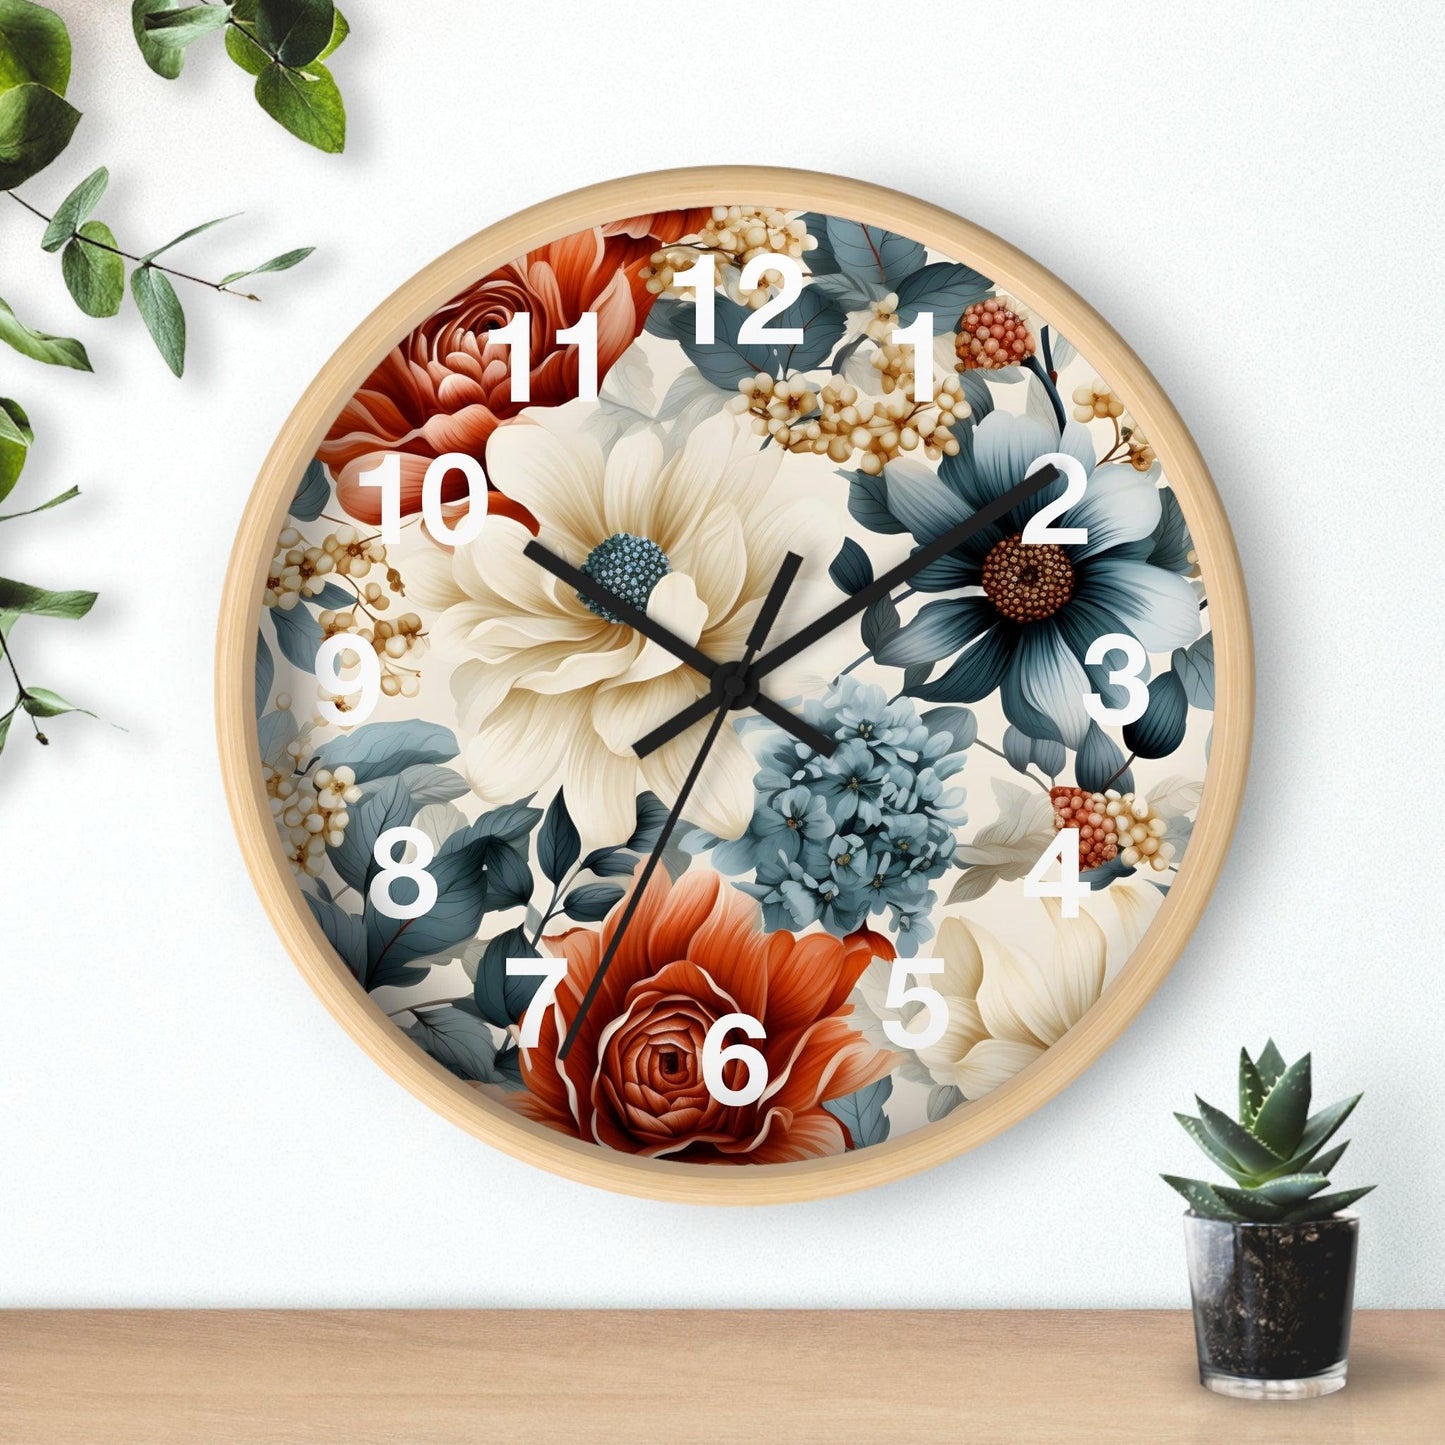 Wild Flower Wall Clock Floral Wall Clock Kids Room Home Decor New Home Gift House Warming Gift for New Home Owner, Dorm Room Clock Collage Student Clock